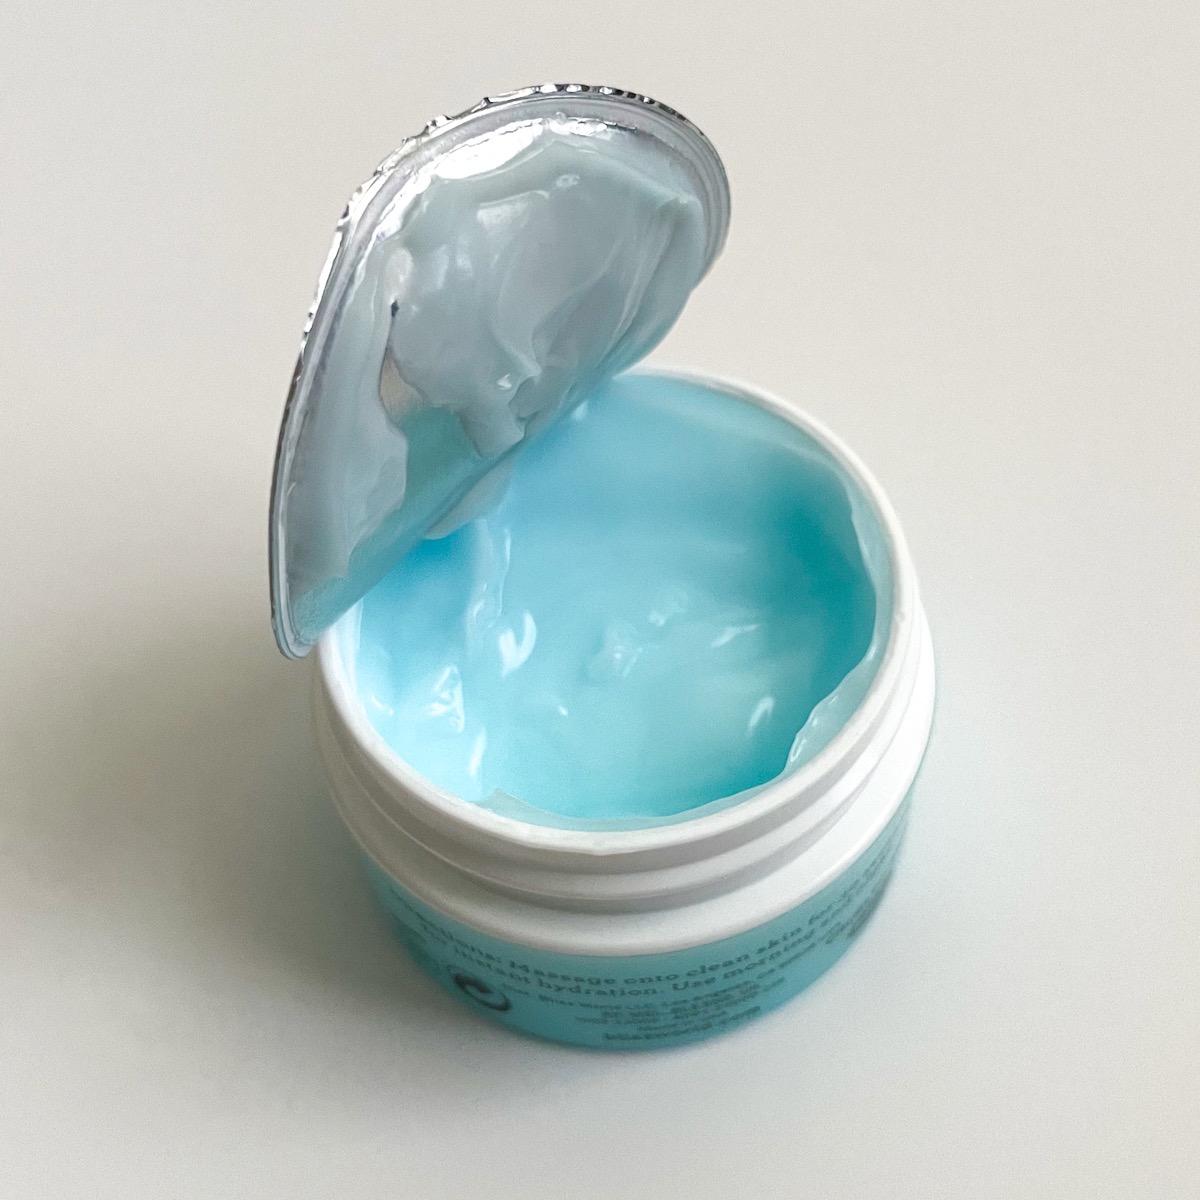 foil seal lifted partially off of jar showing blue moisturizer